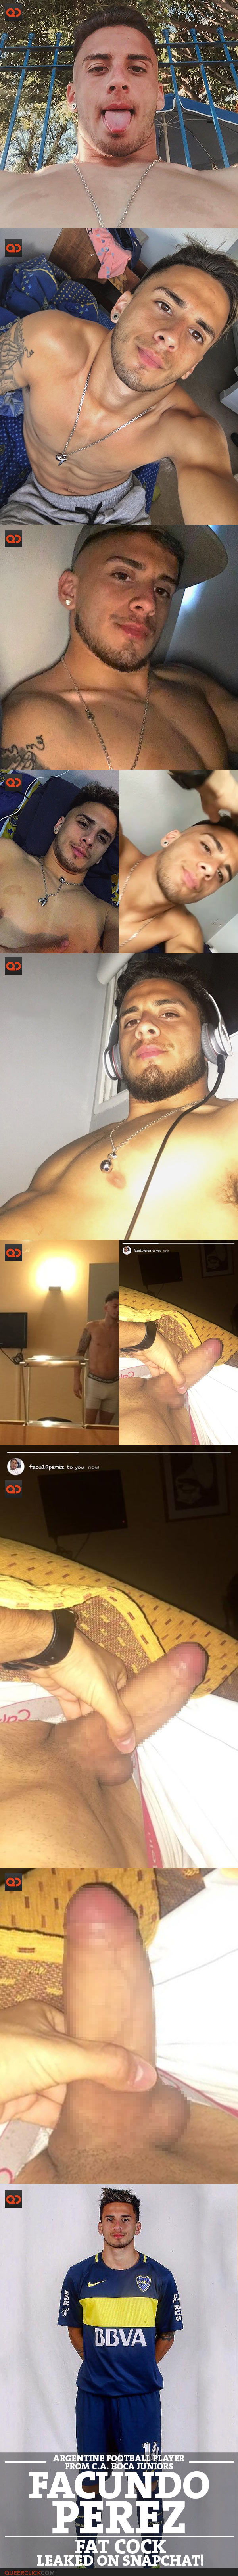 Facundo Perez, Argentine Football Player From C.A. Boca Juniors, Alleged Fat Cock Leaked On Snapchat!